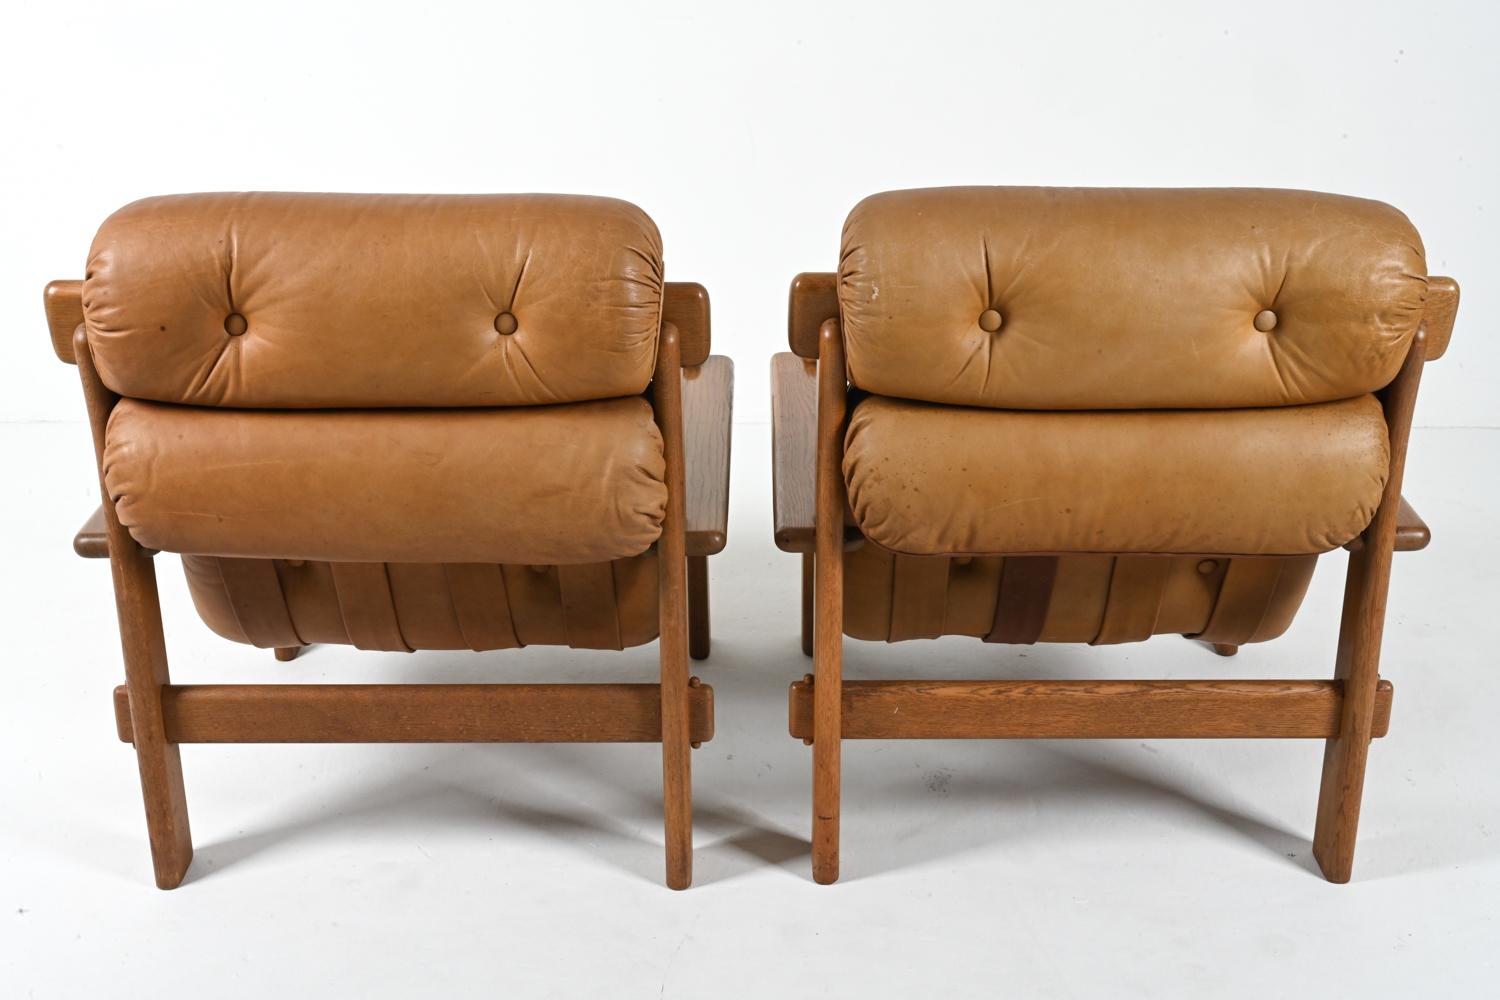 Pair of European Brutalist Armchairs in Oak & Leather, c. 1970's For Sale 9